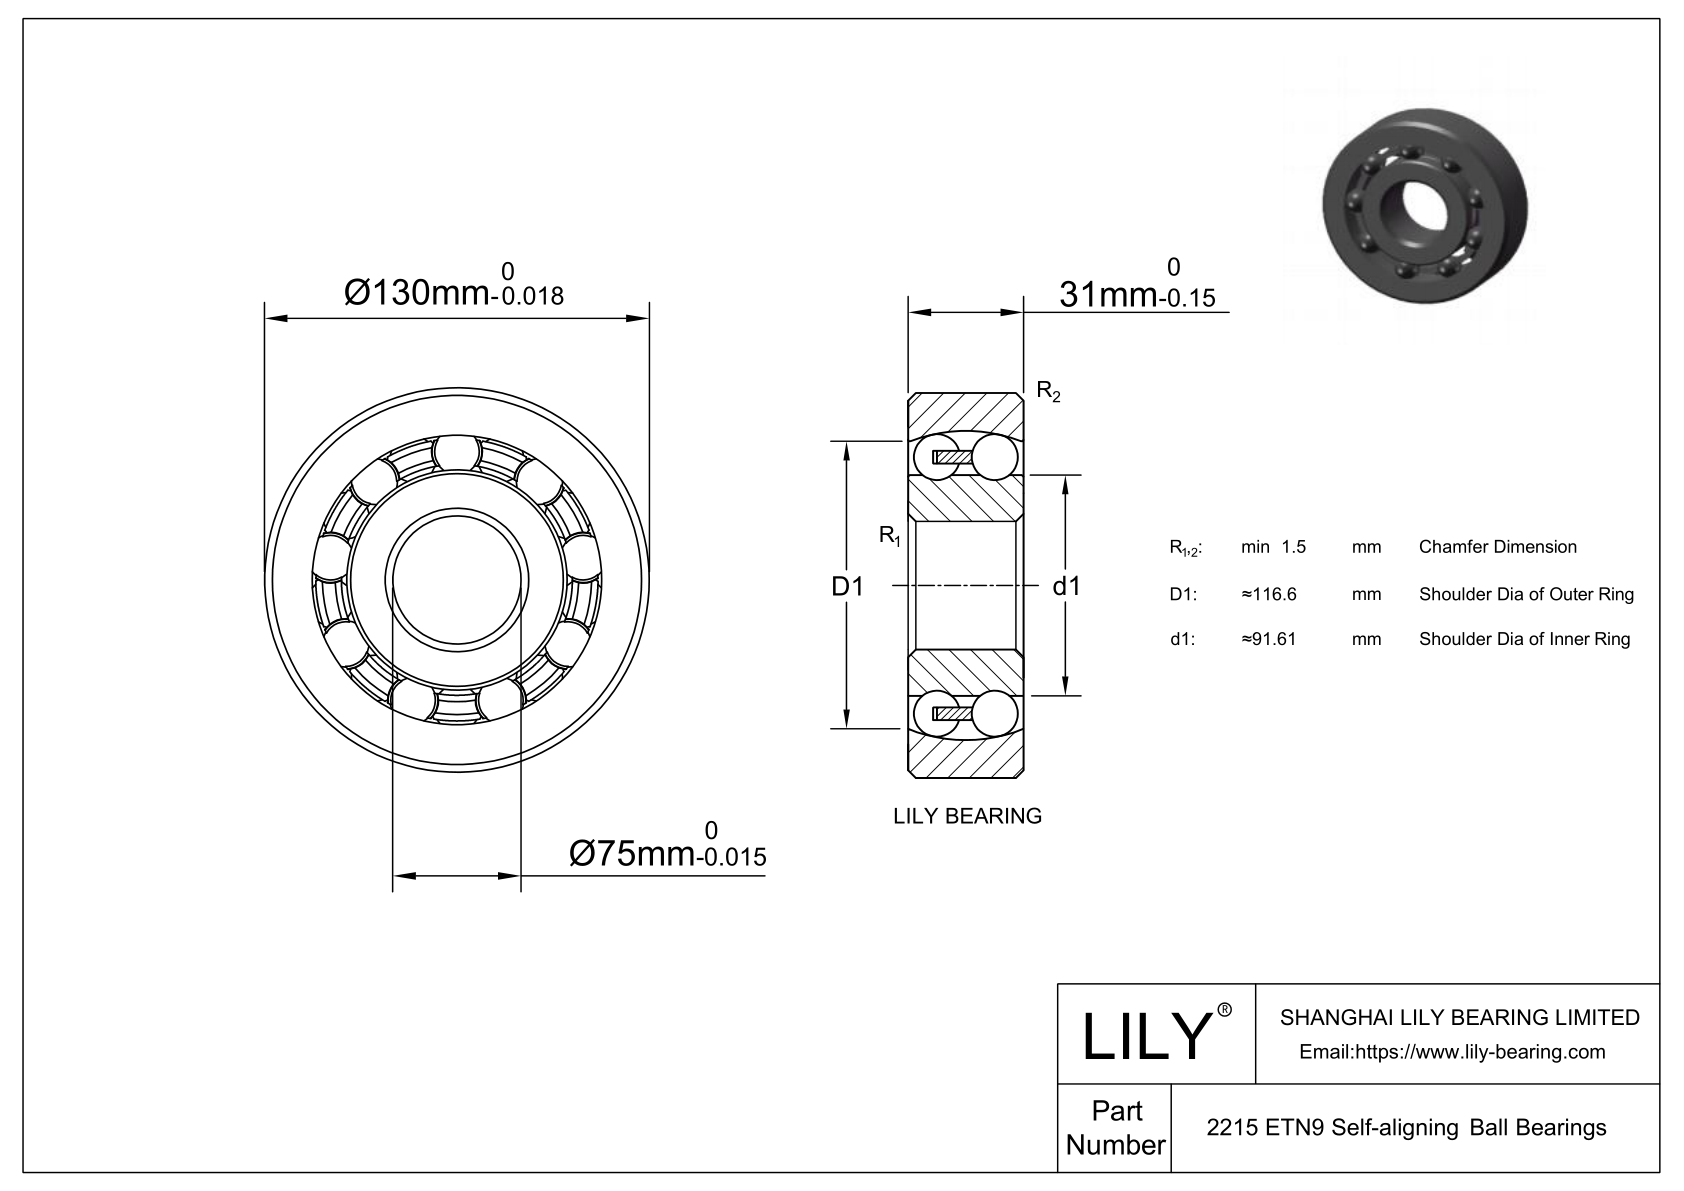 S2215 ETN9 Stainless Steel Self Aligning Ball Bearings cad drawing